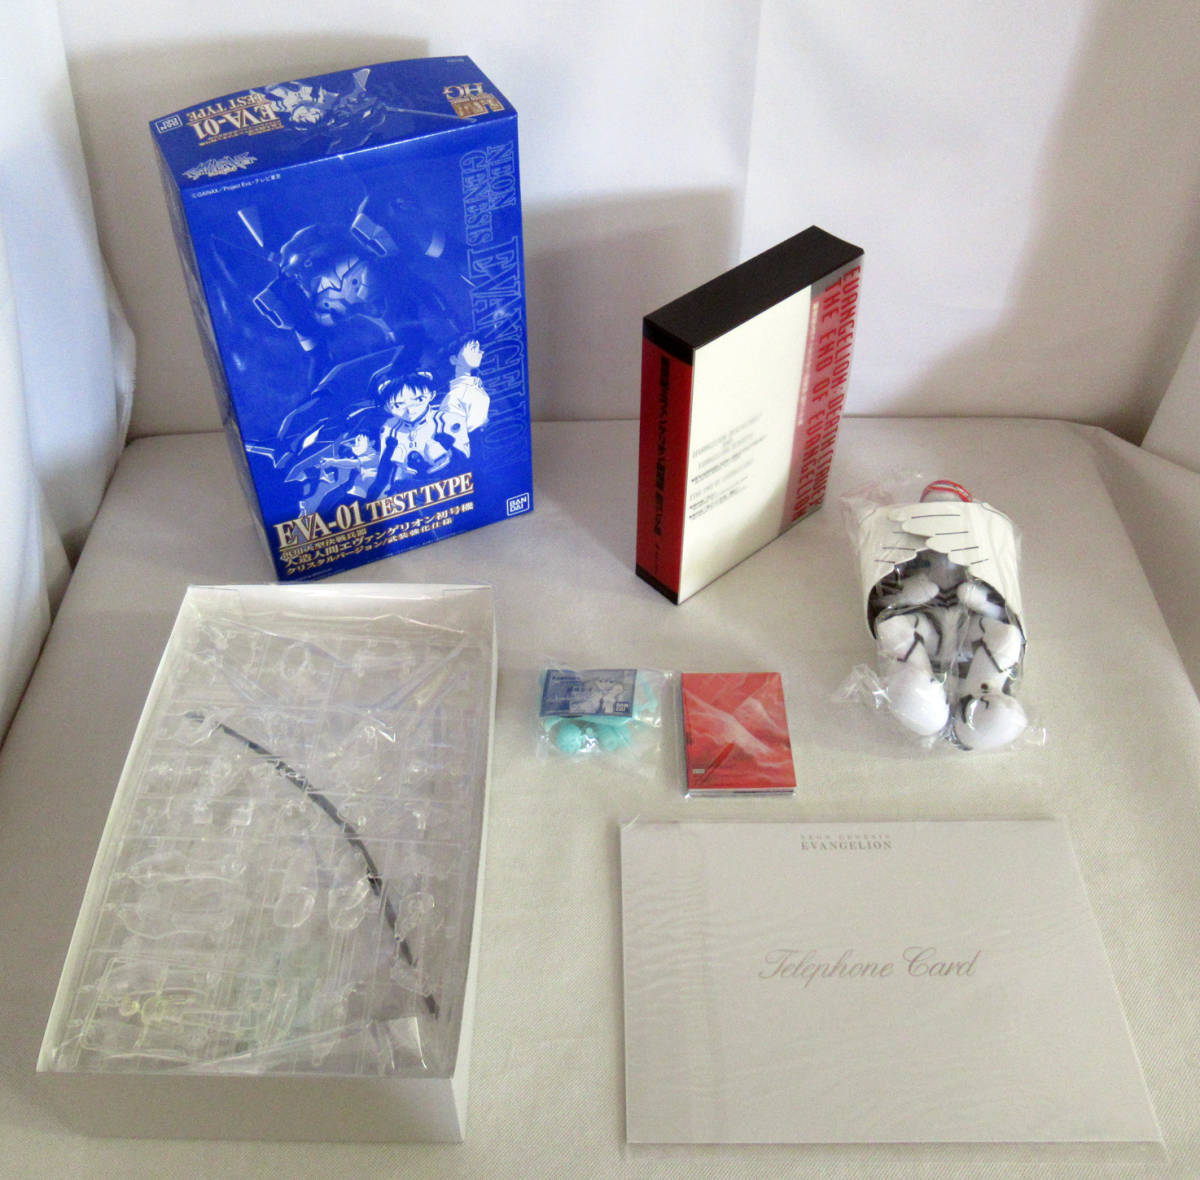 B238* new goods unopened LD BOX* Neon Genesis Evangelion theater version BOX complete the first times limitation version * goods unused telephone card Carddas master z* premium θ